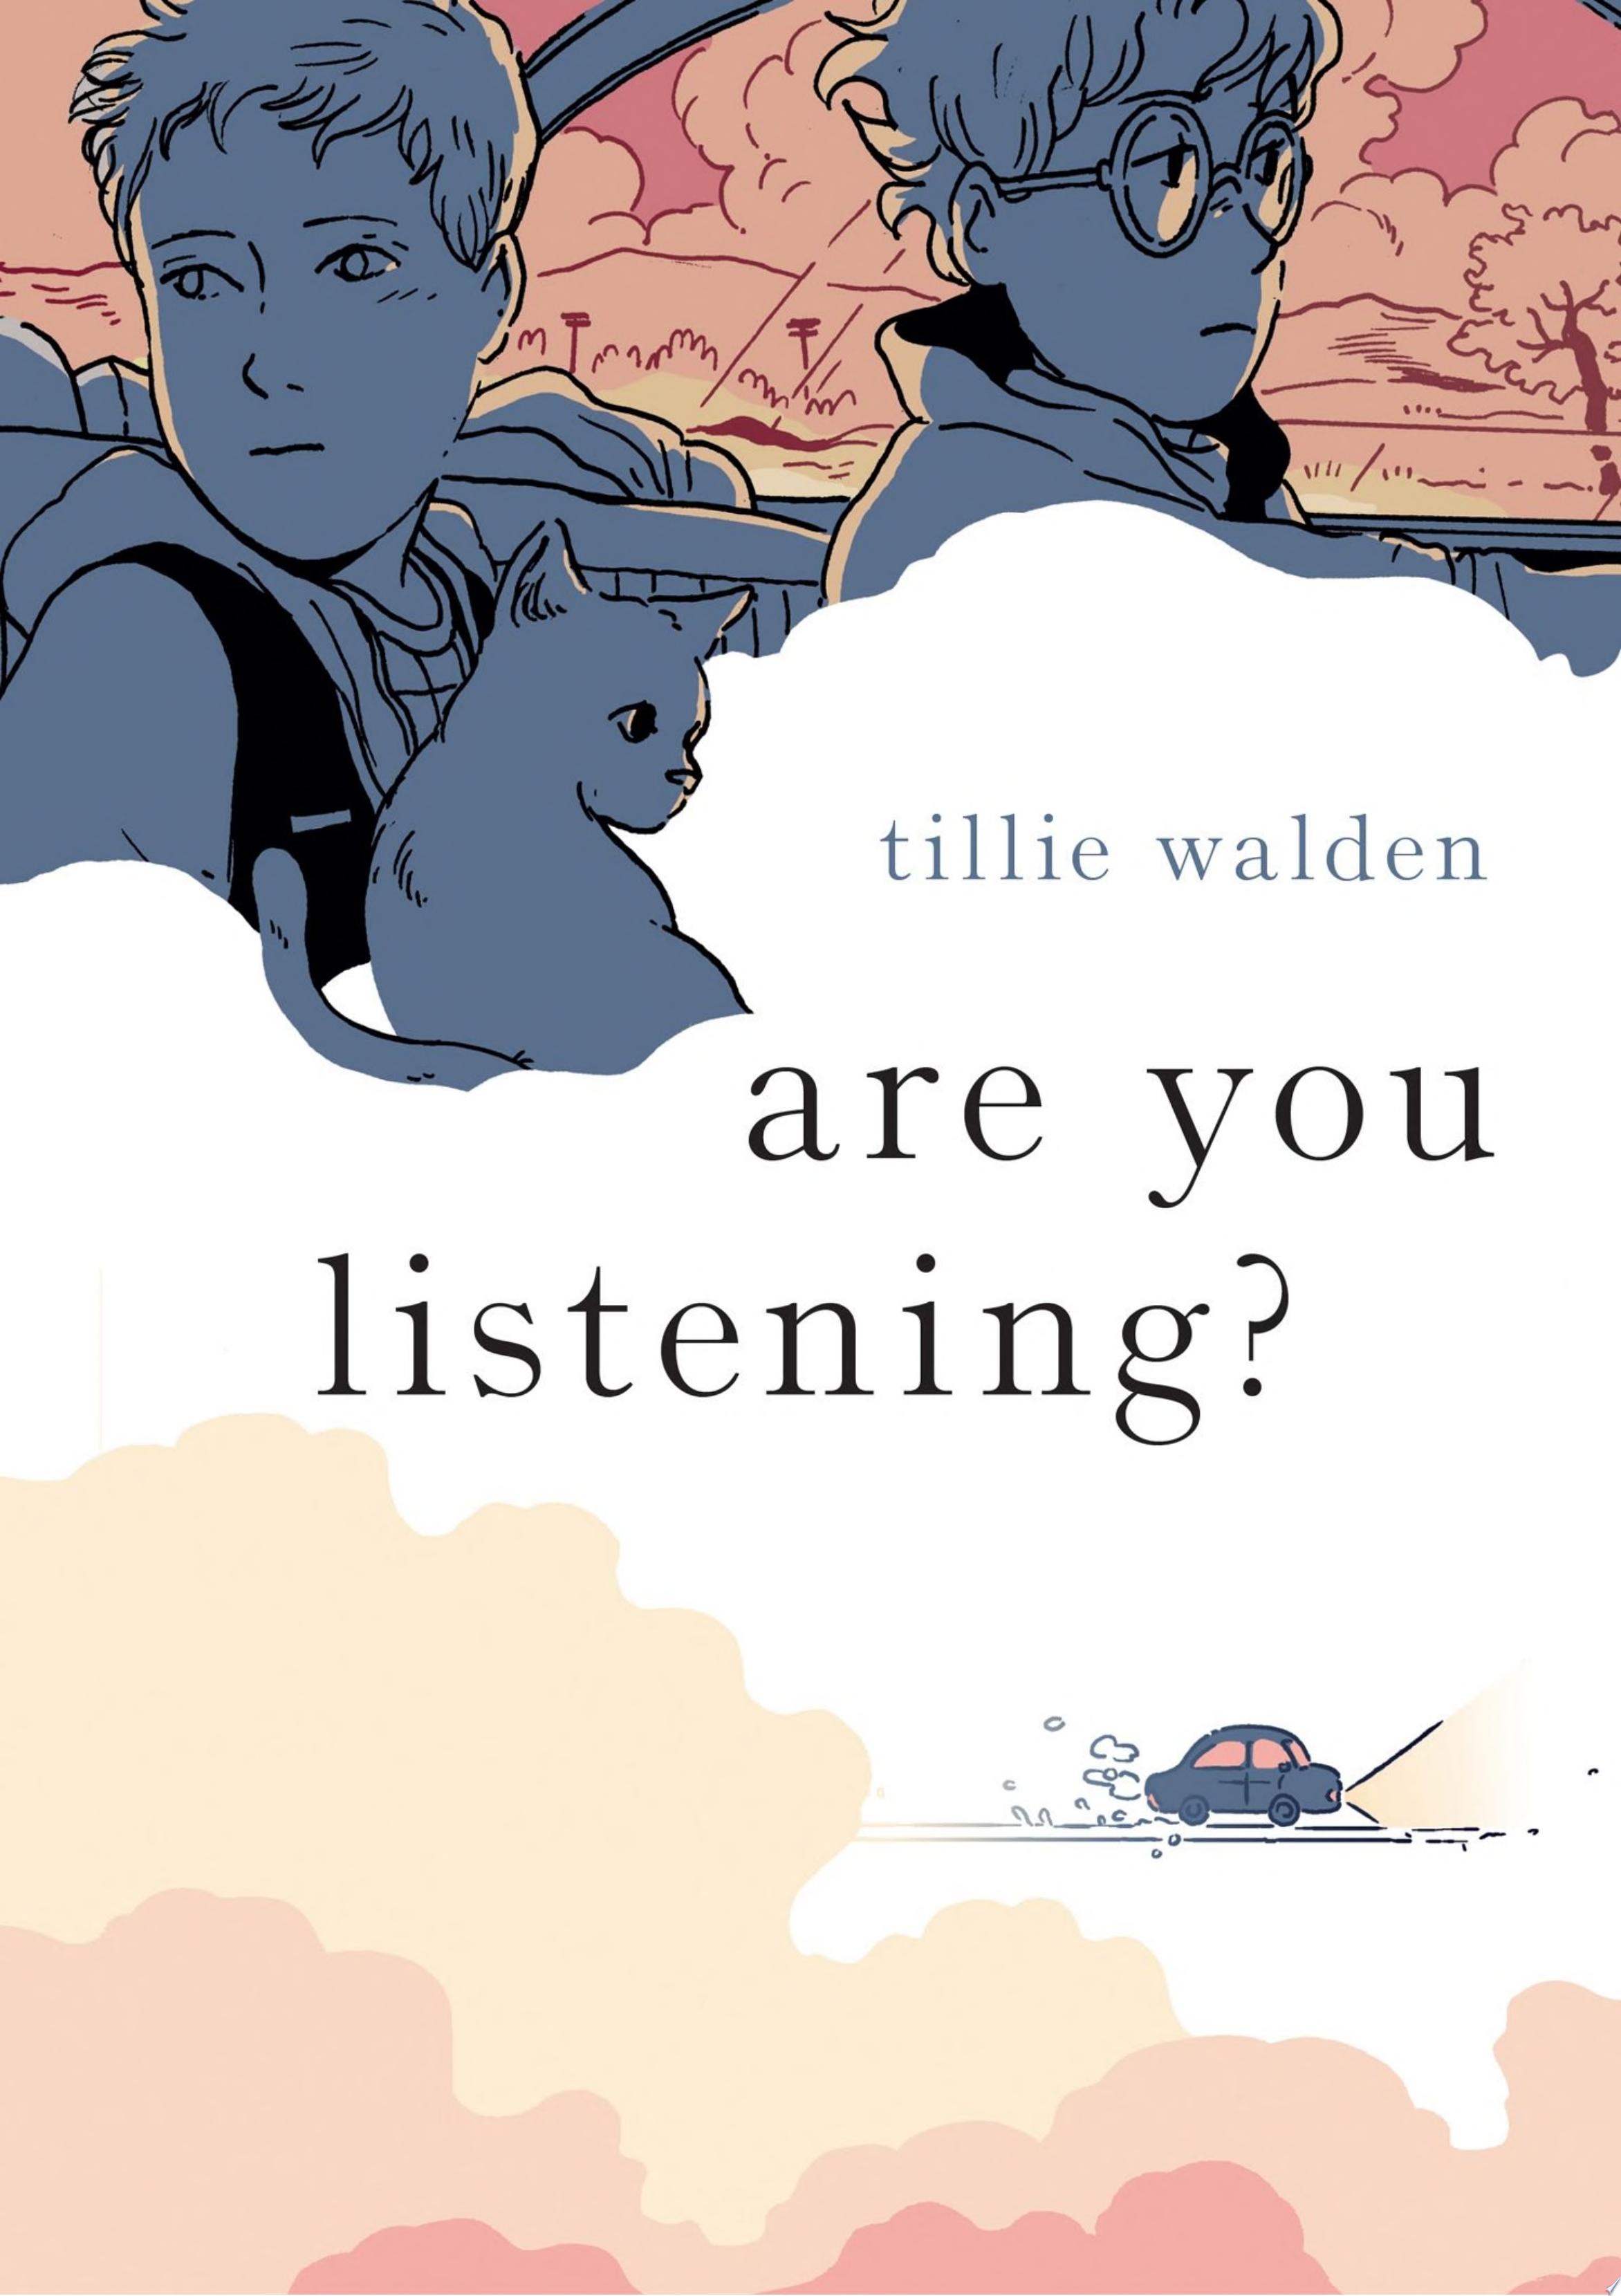 Image for "Are You Listening?"